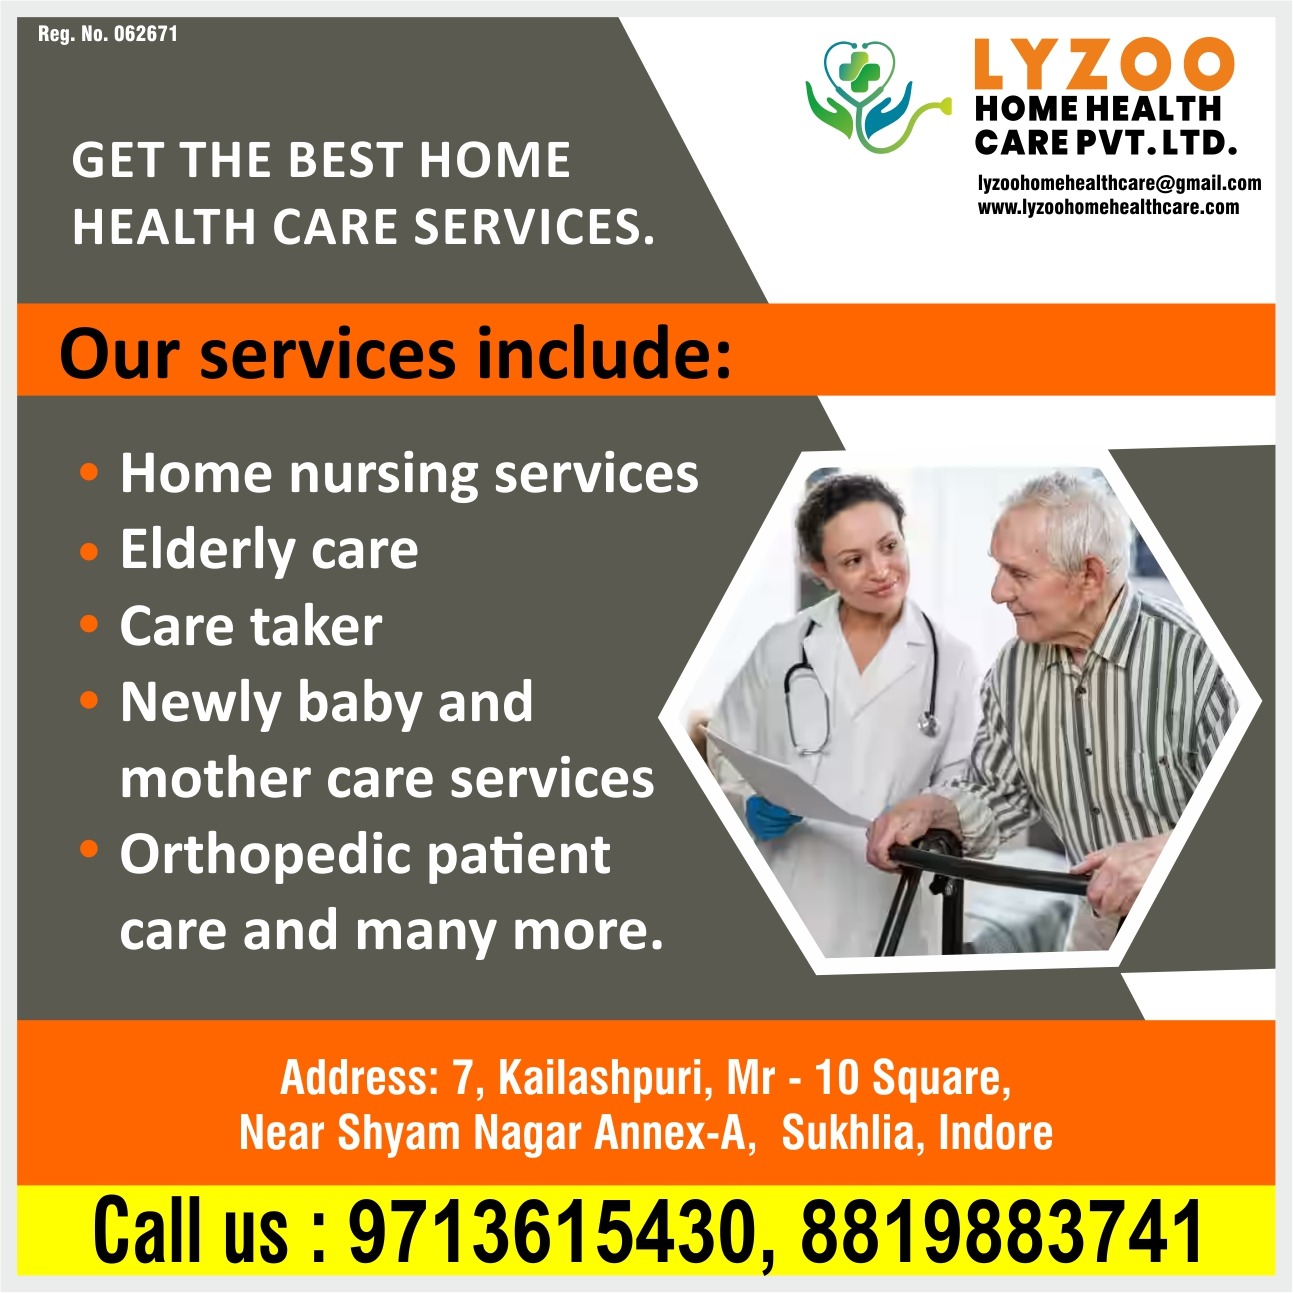 Best Home Healthcare Services in Indore